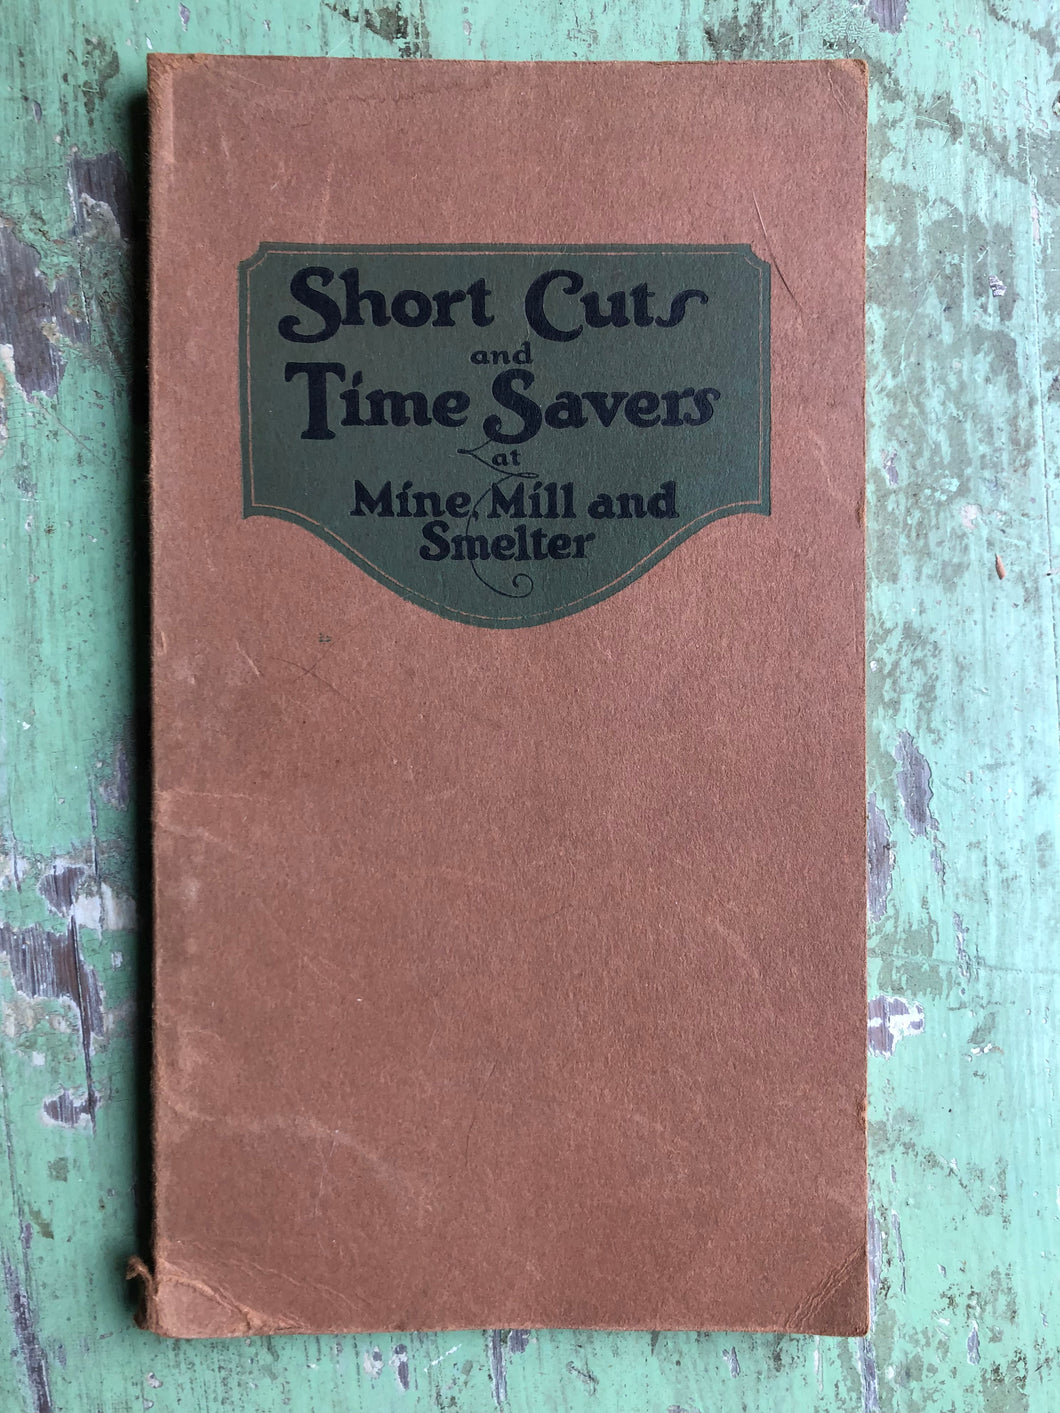 Short Cuts and Time-Savers at Mine, Mill and Smelter